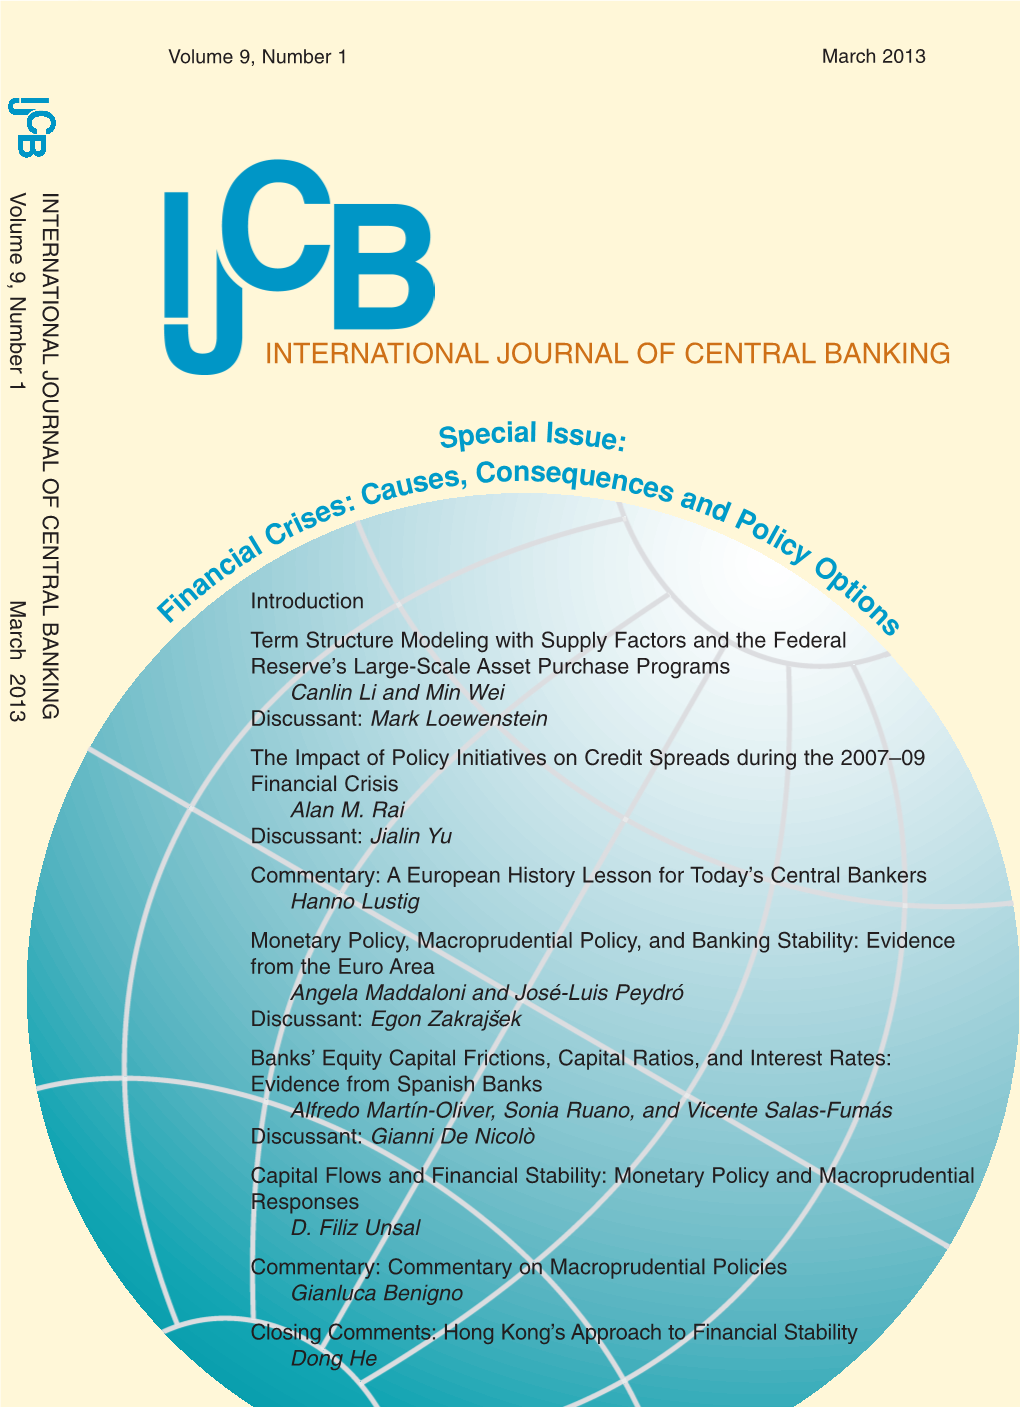 Cover and Contents, IJCB Journal March 2013